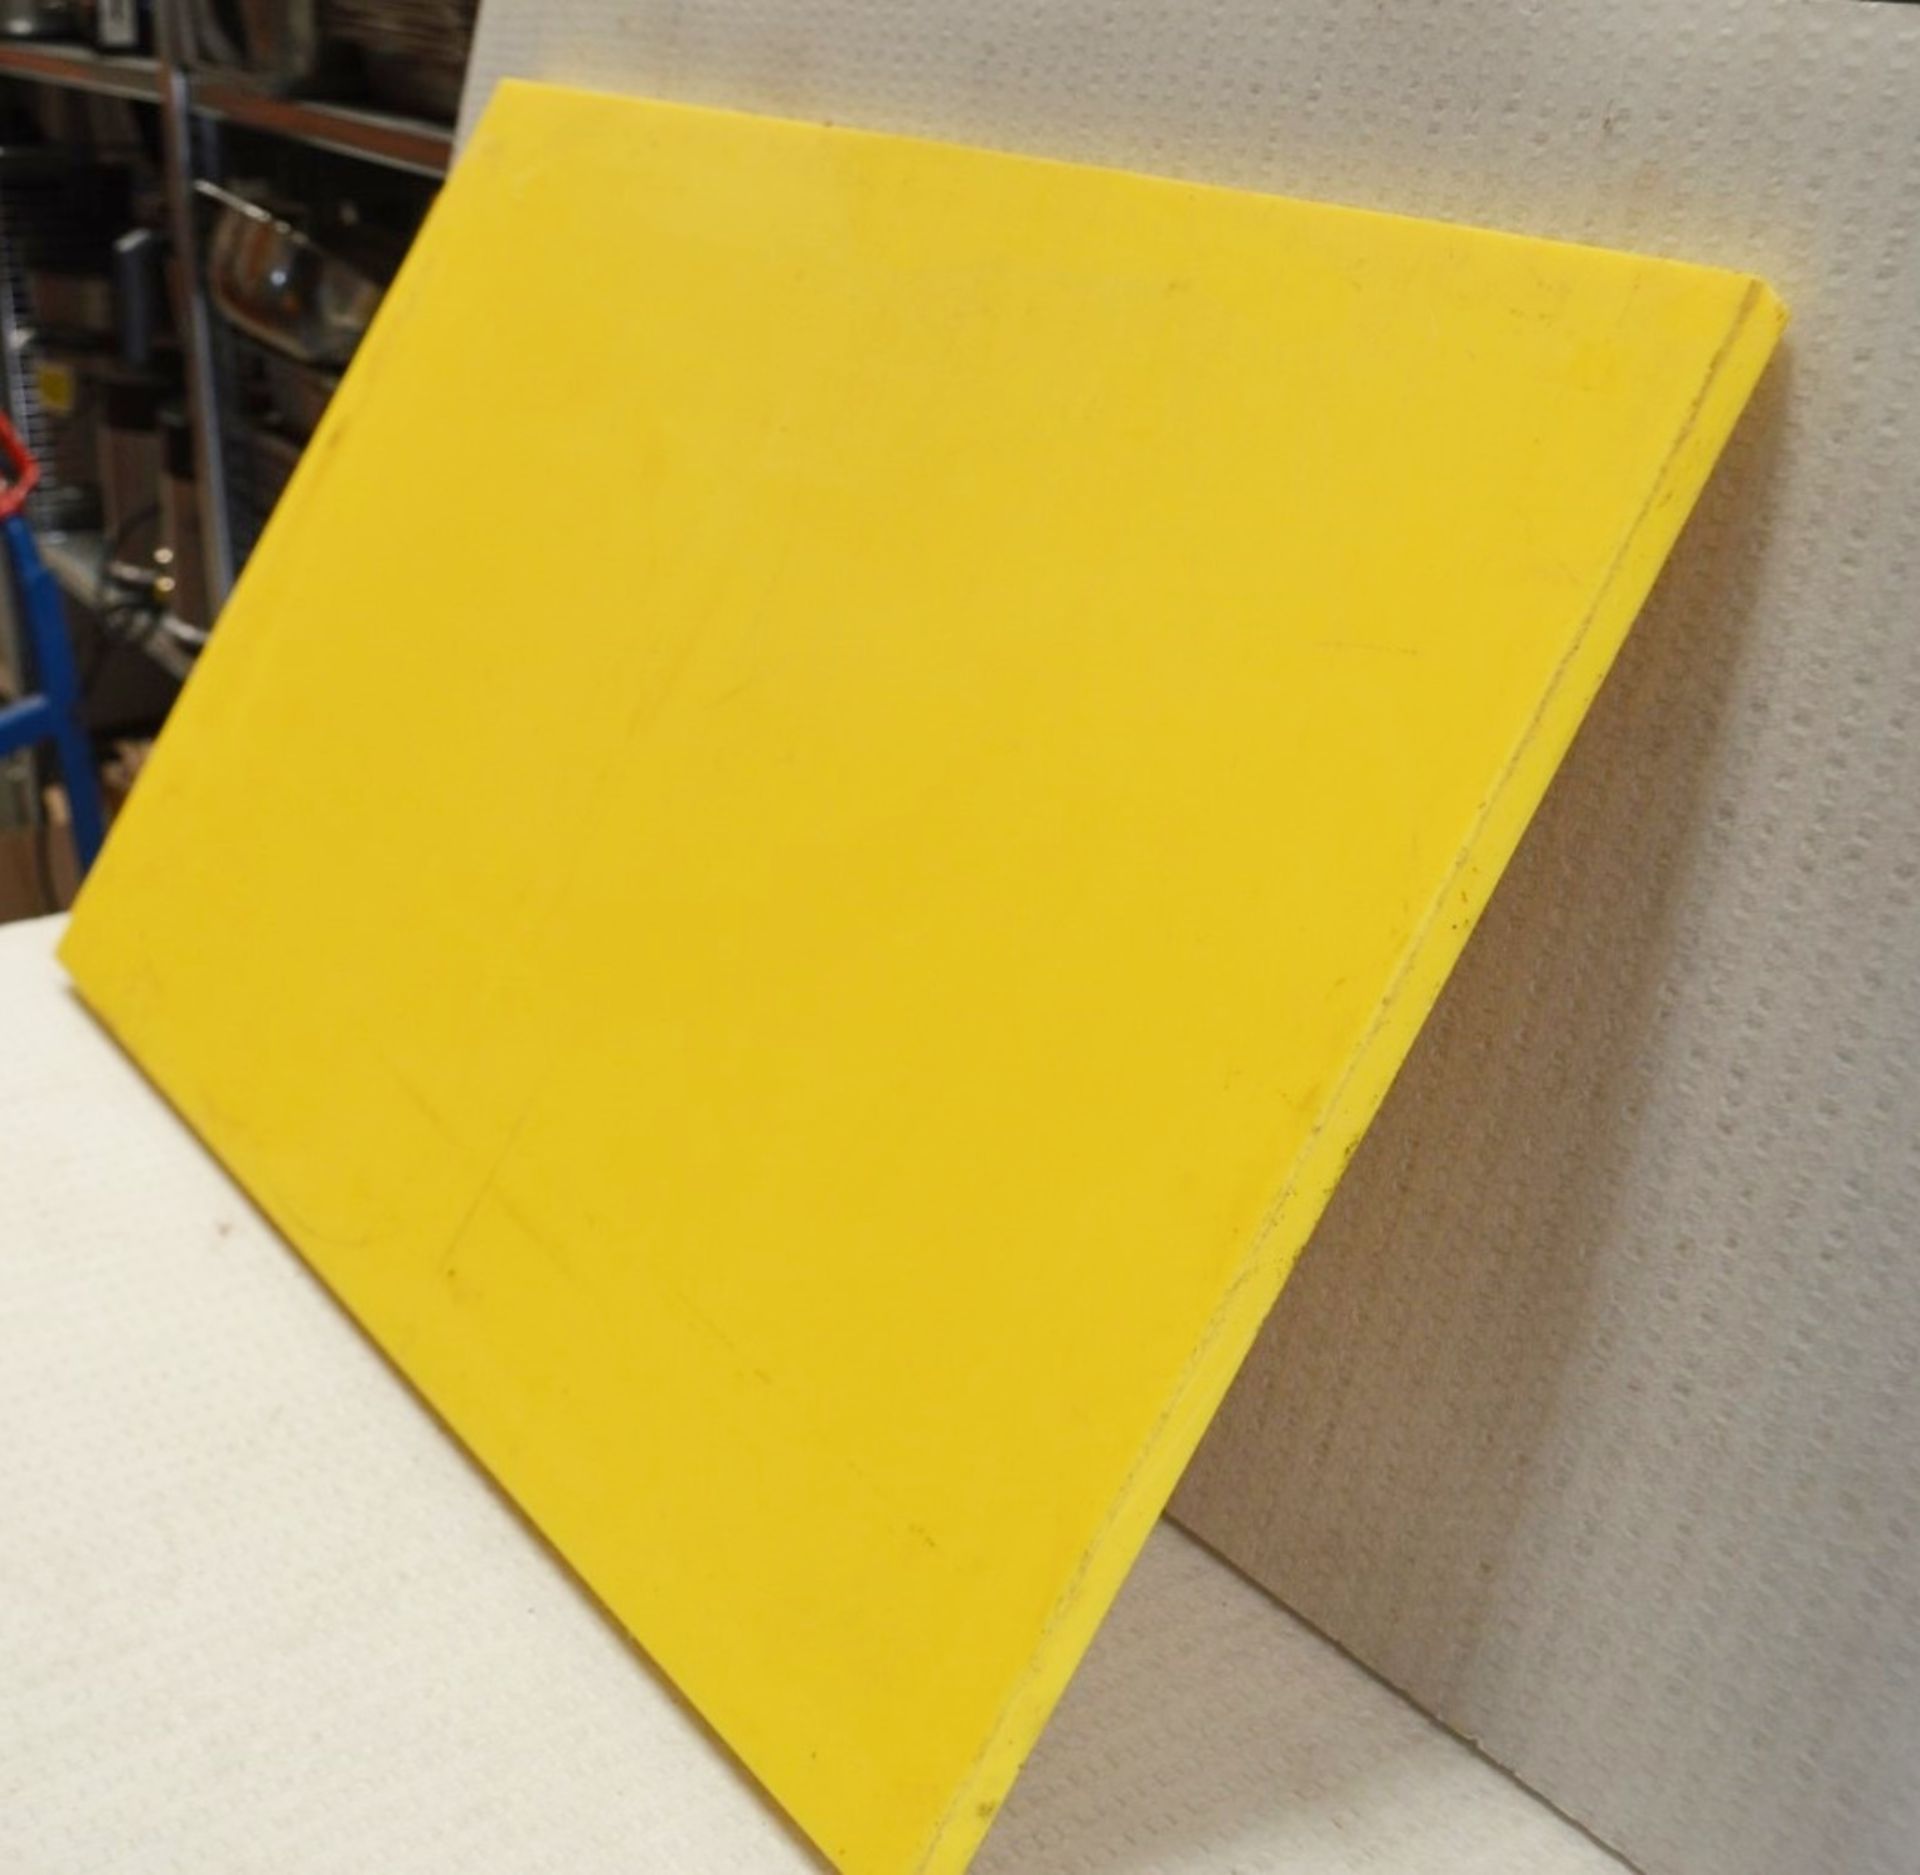 1 x Large Commercial Chopping / Preparation Board - Hygenic and Colour Coded Yellow - Dimensions: - Image 2 of 3